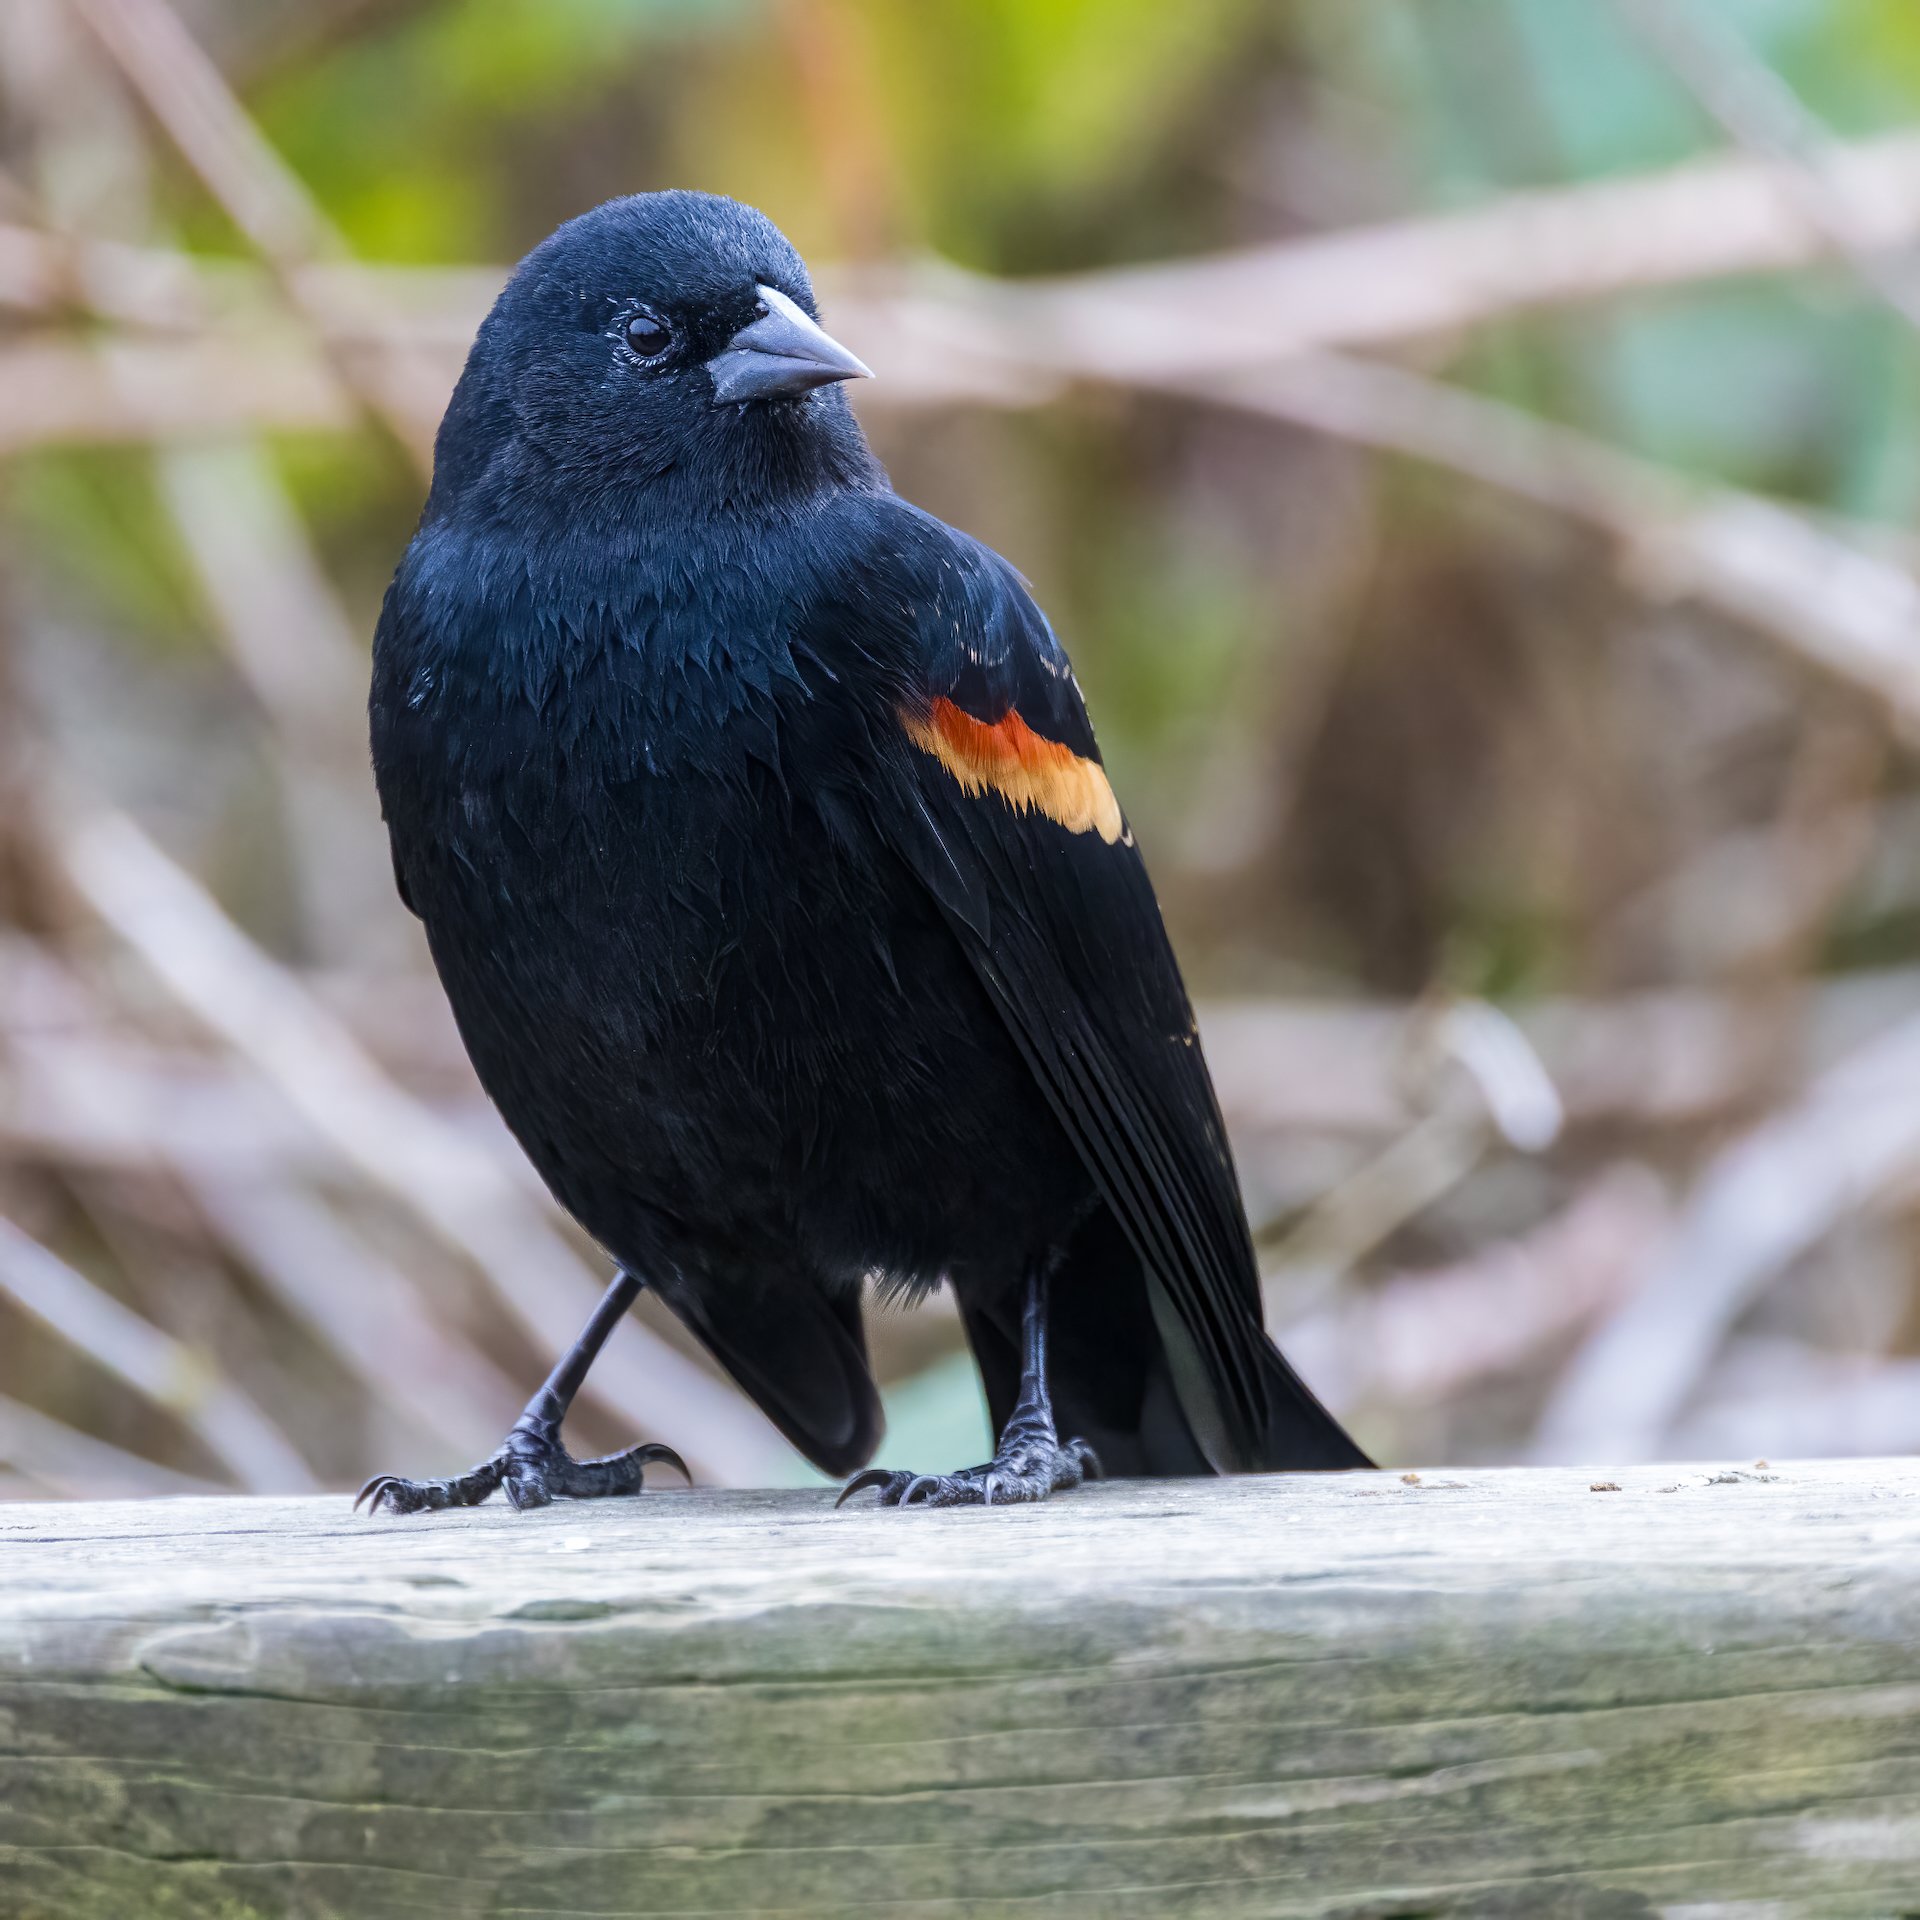  The red-winged blackbirds are getting pretty calm around people.  